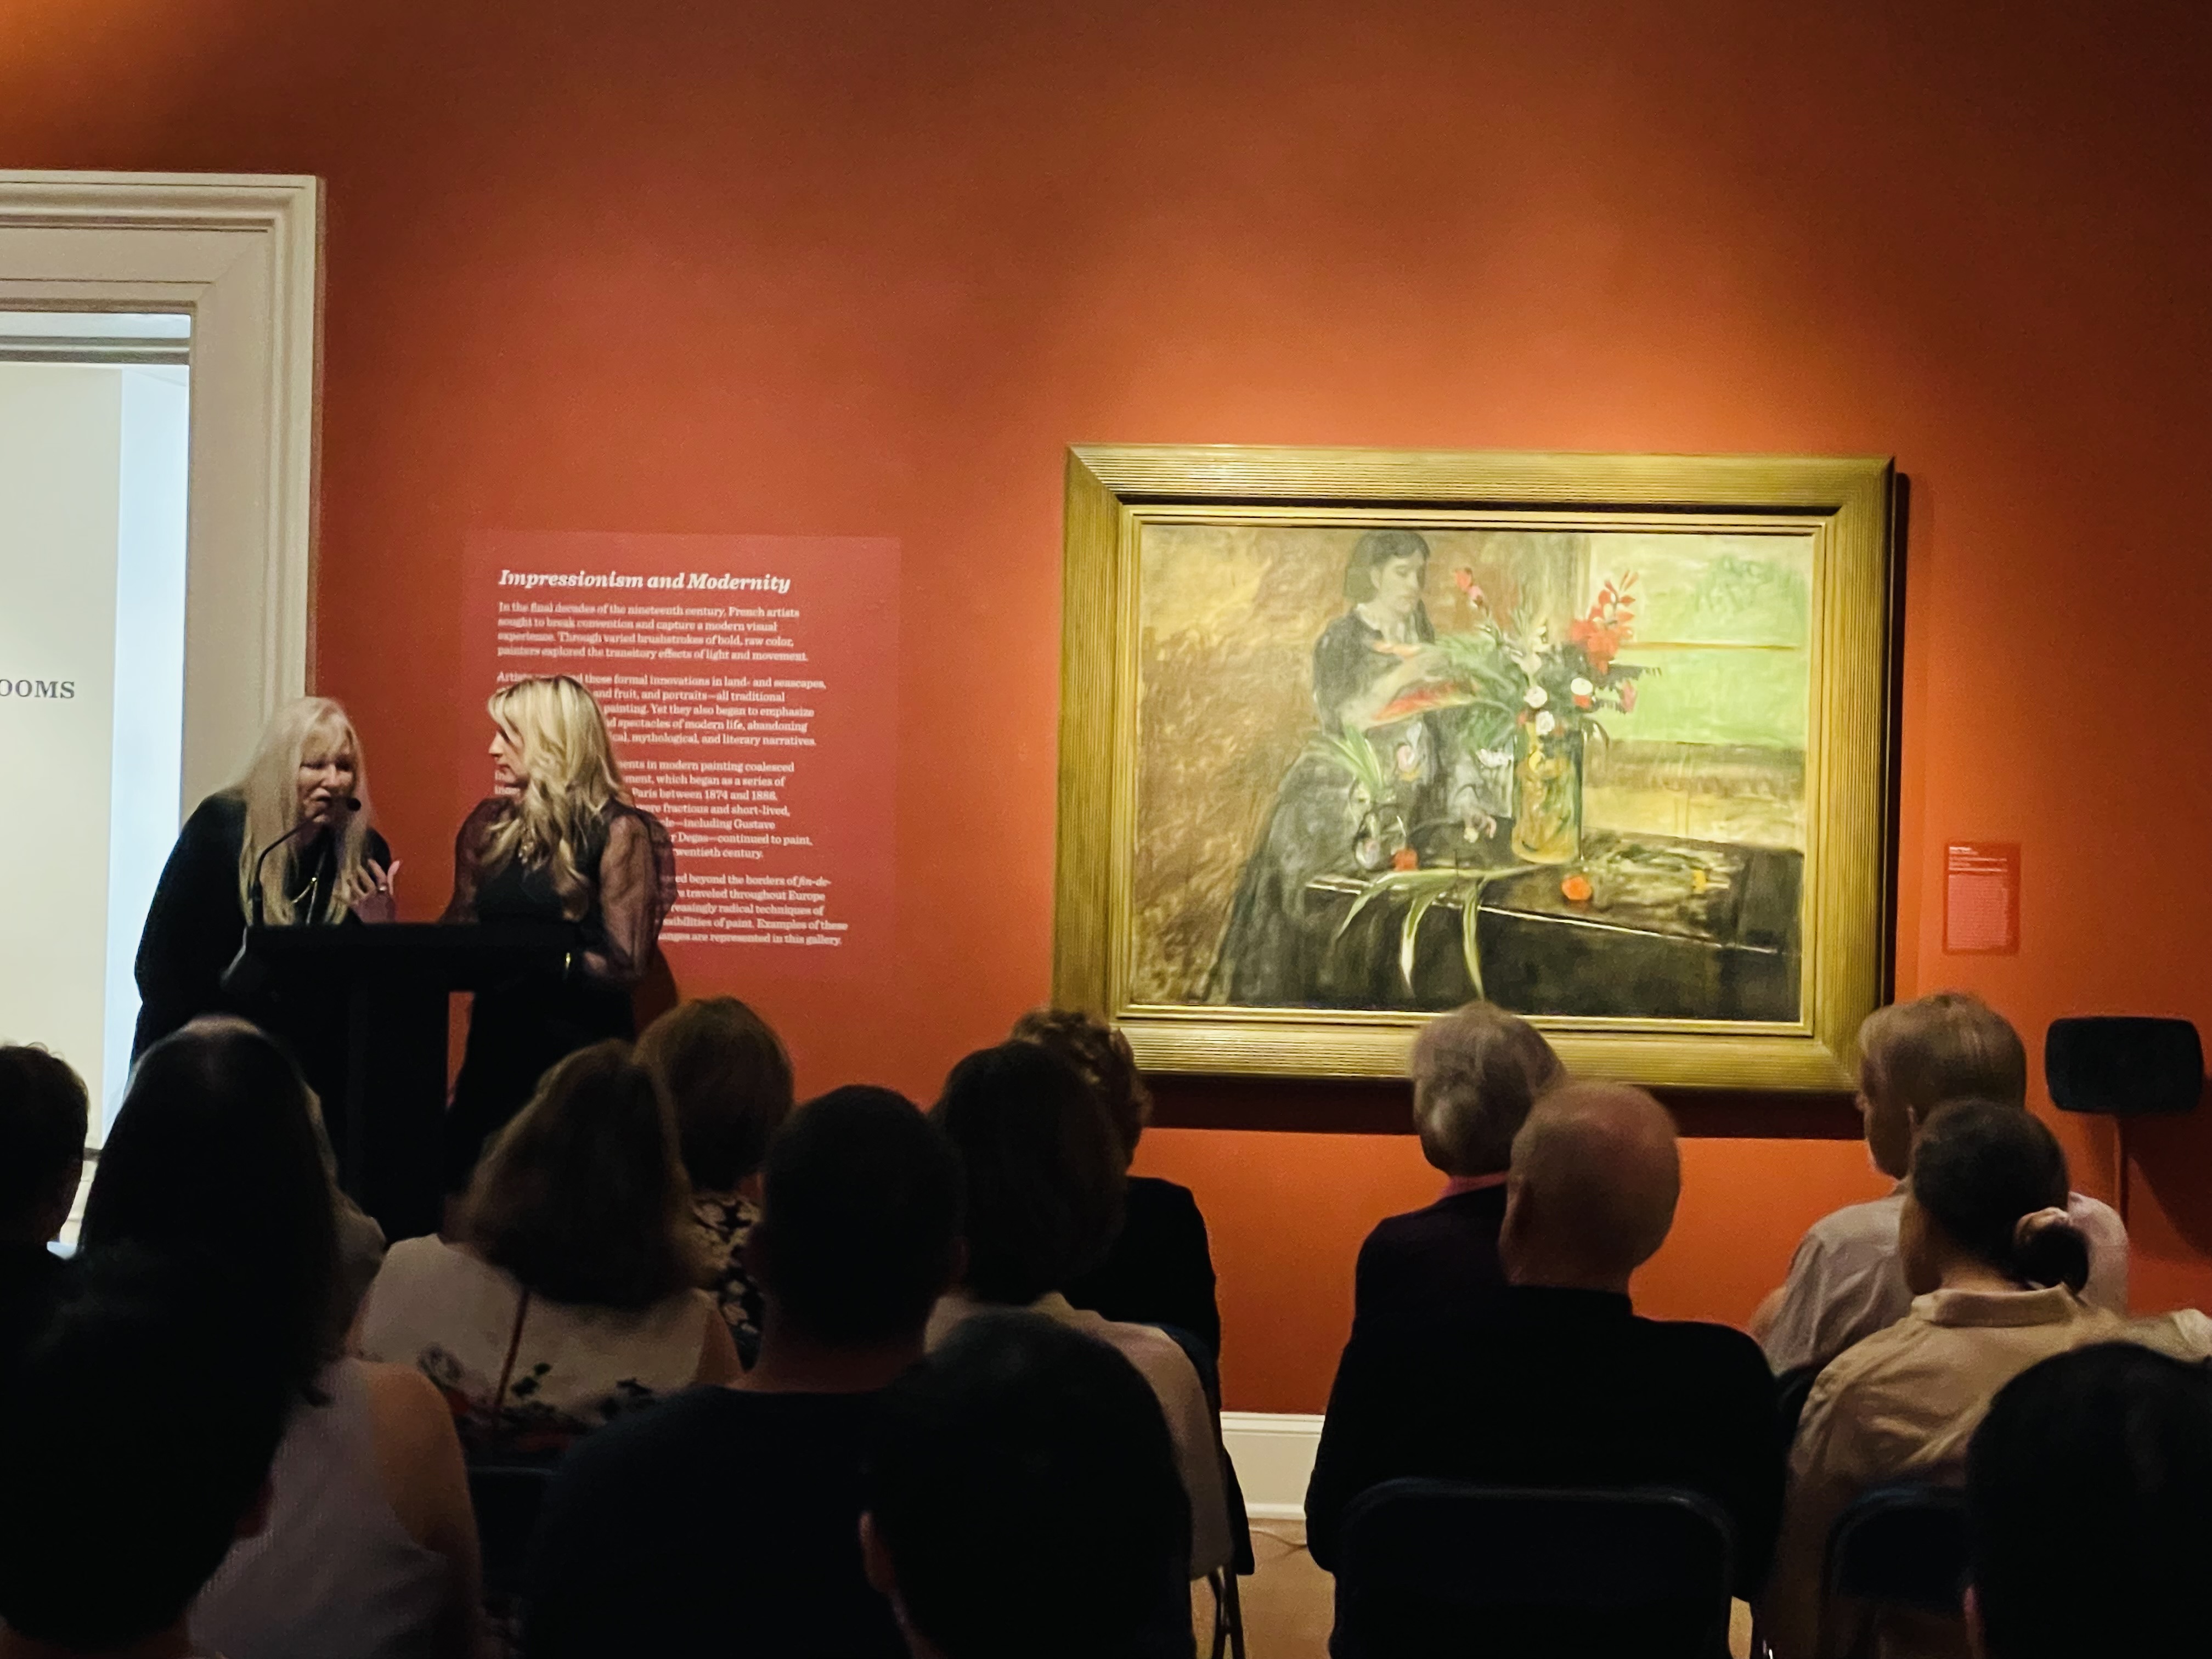 Rosary and Rory speaking to an audience in front of a large painting